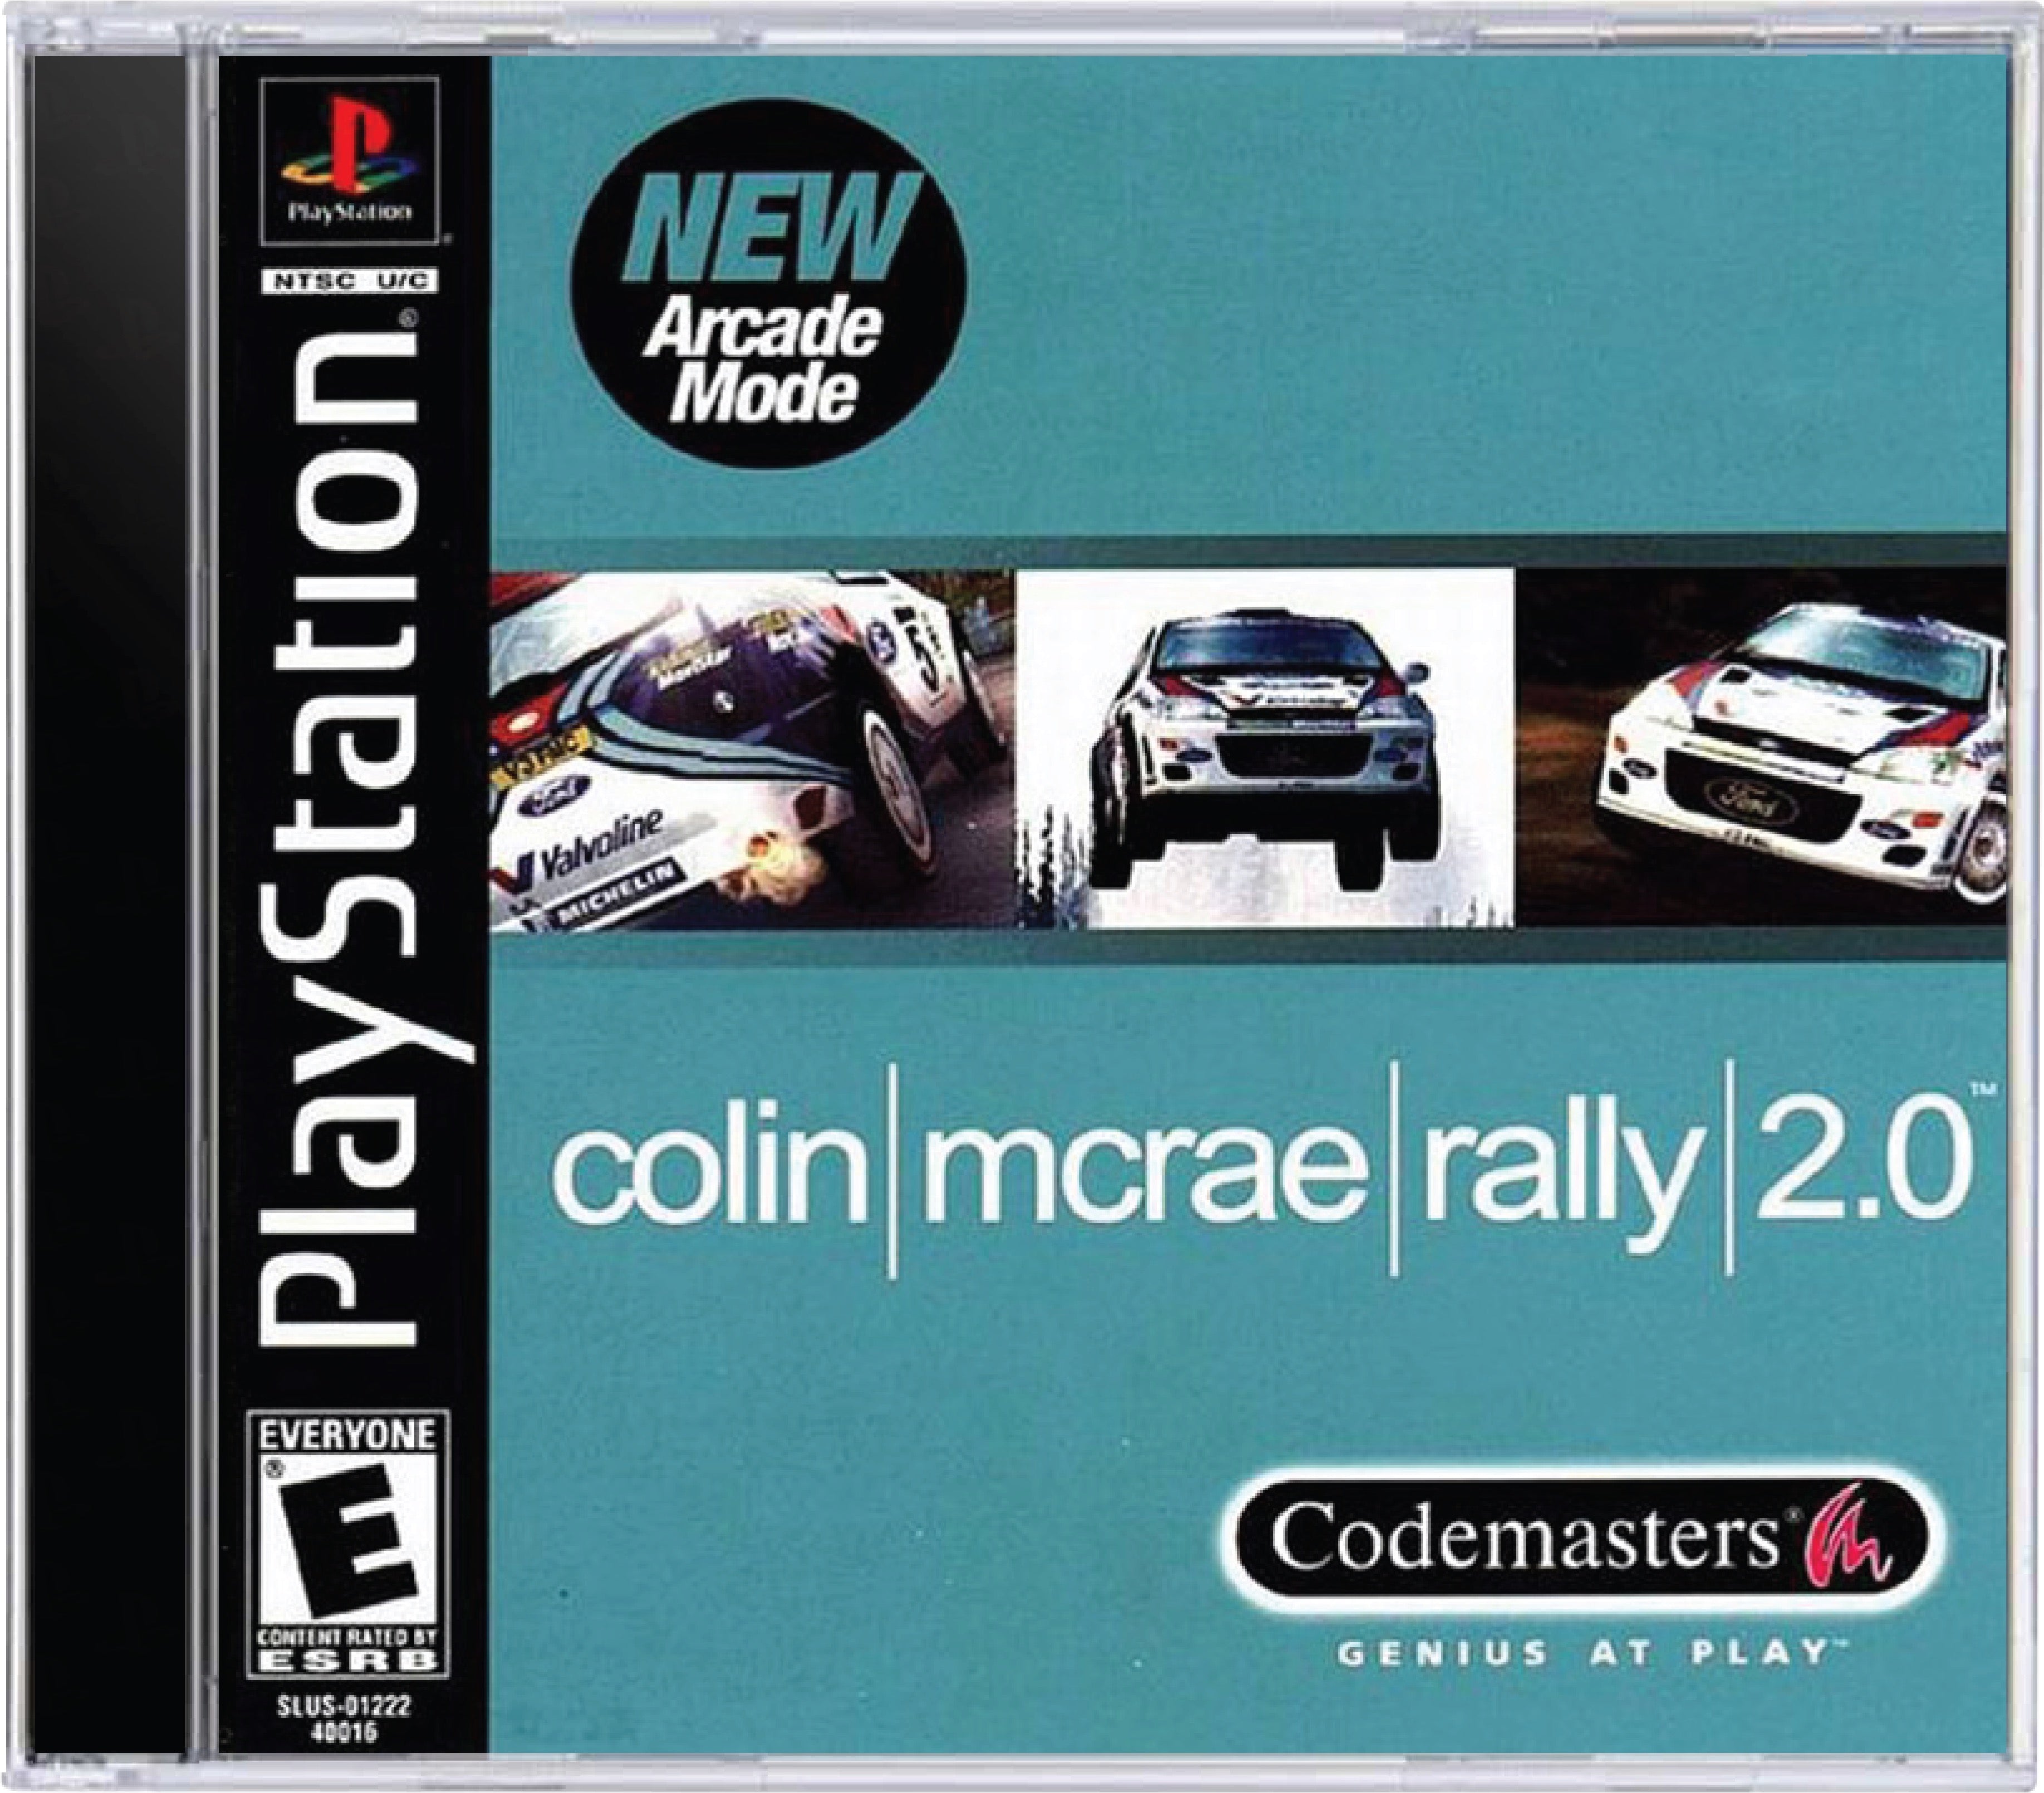 Colin Mcrae Rally 2.0 Cover Art and Product Photo